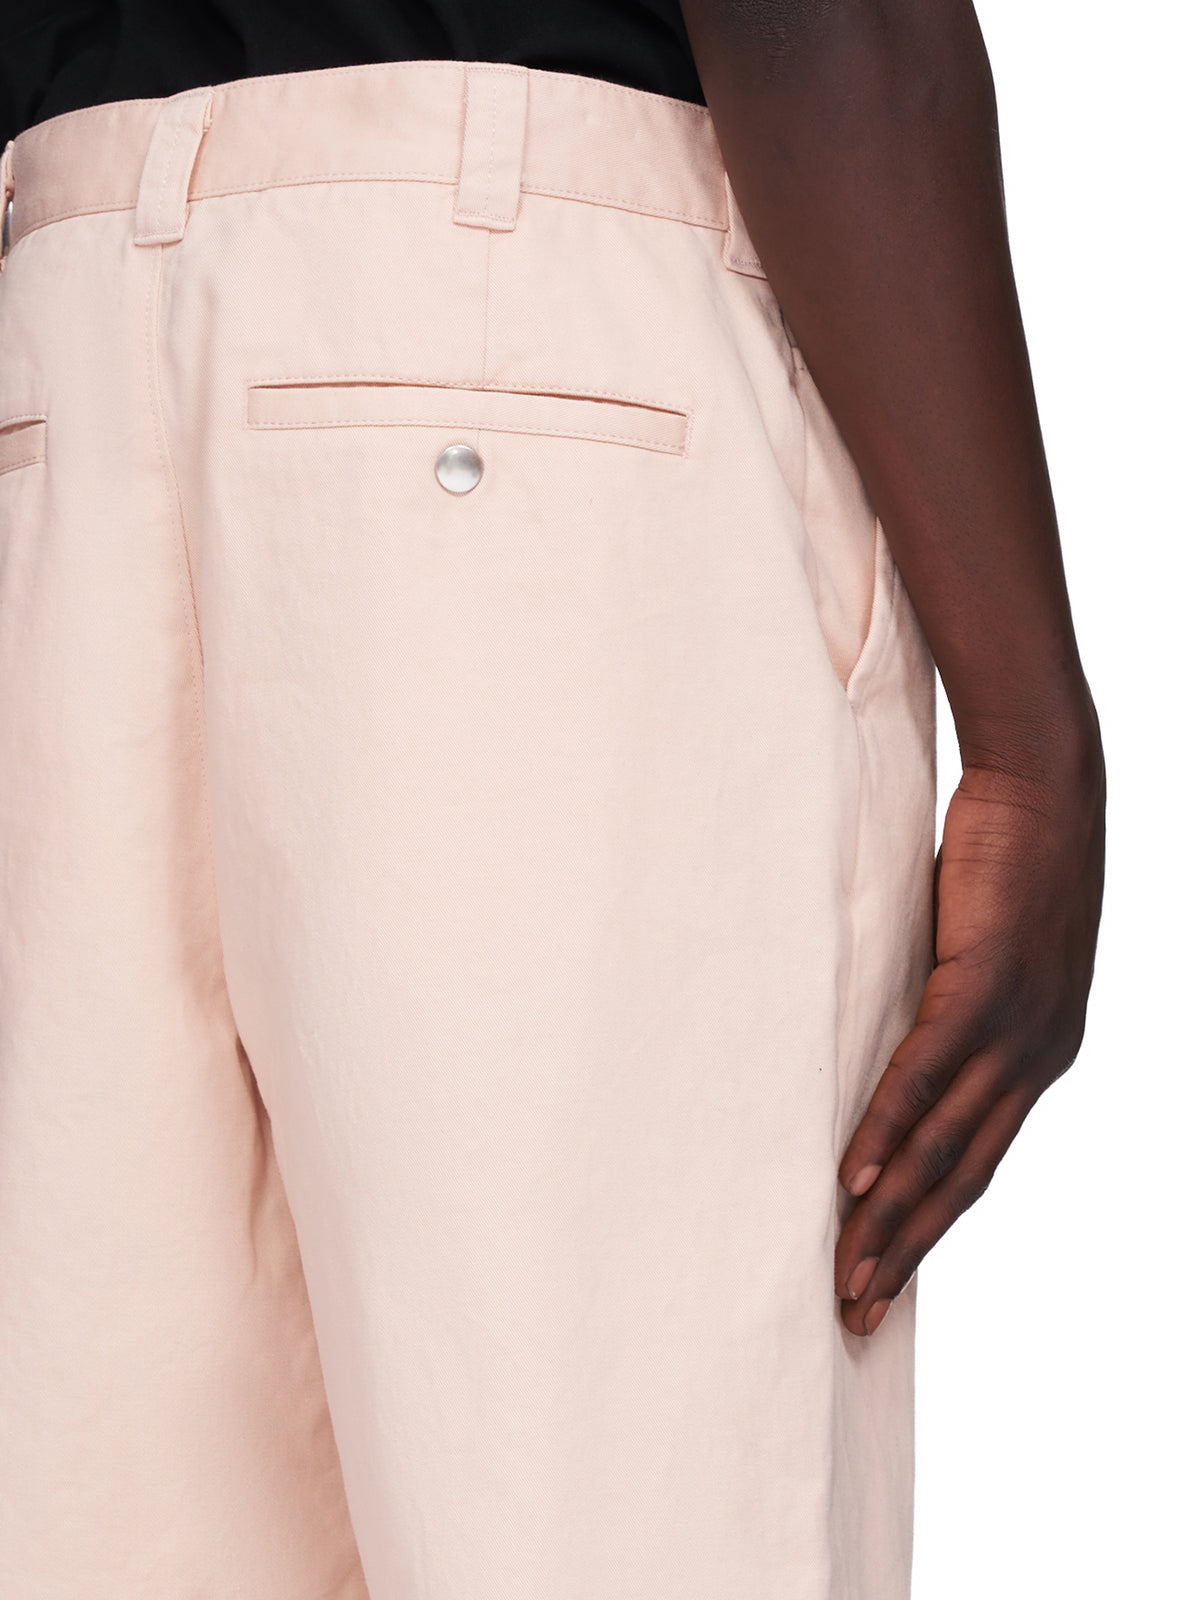 Undercover Cotton Trousers | H. Lorenzo - detail 